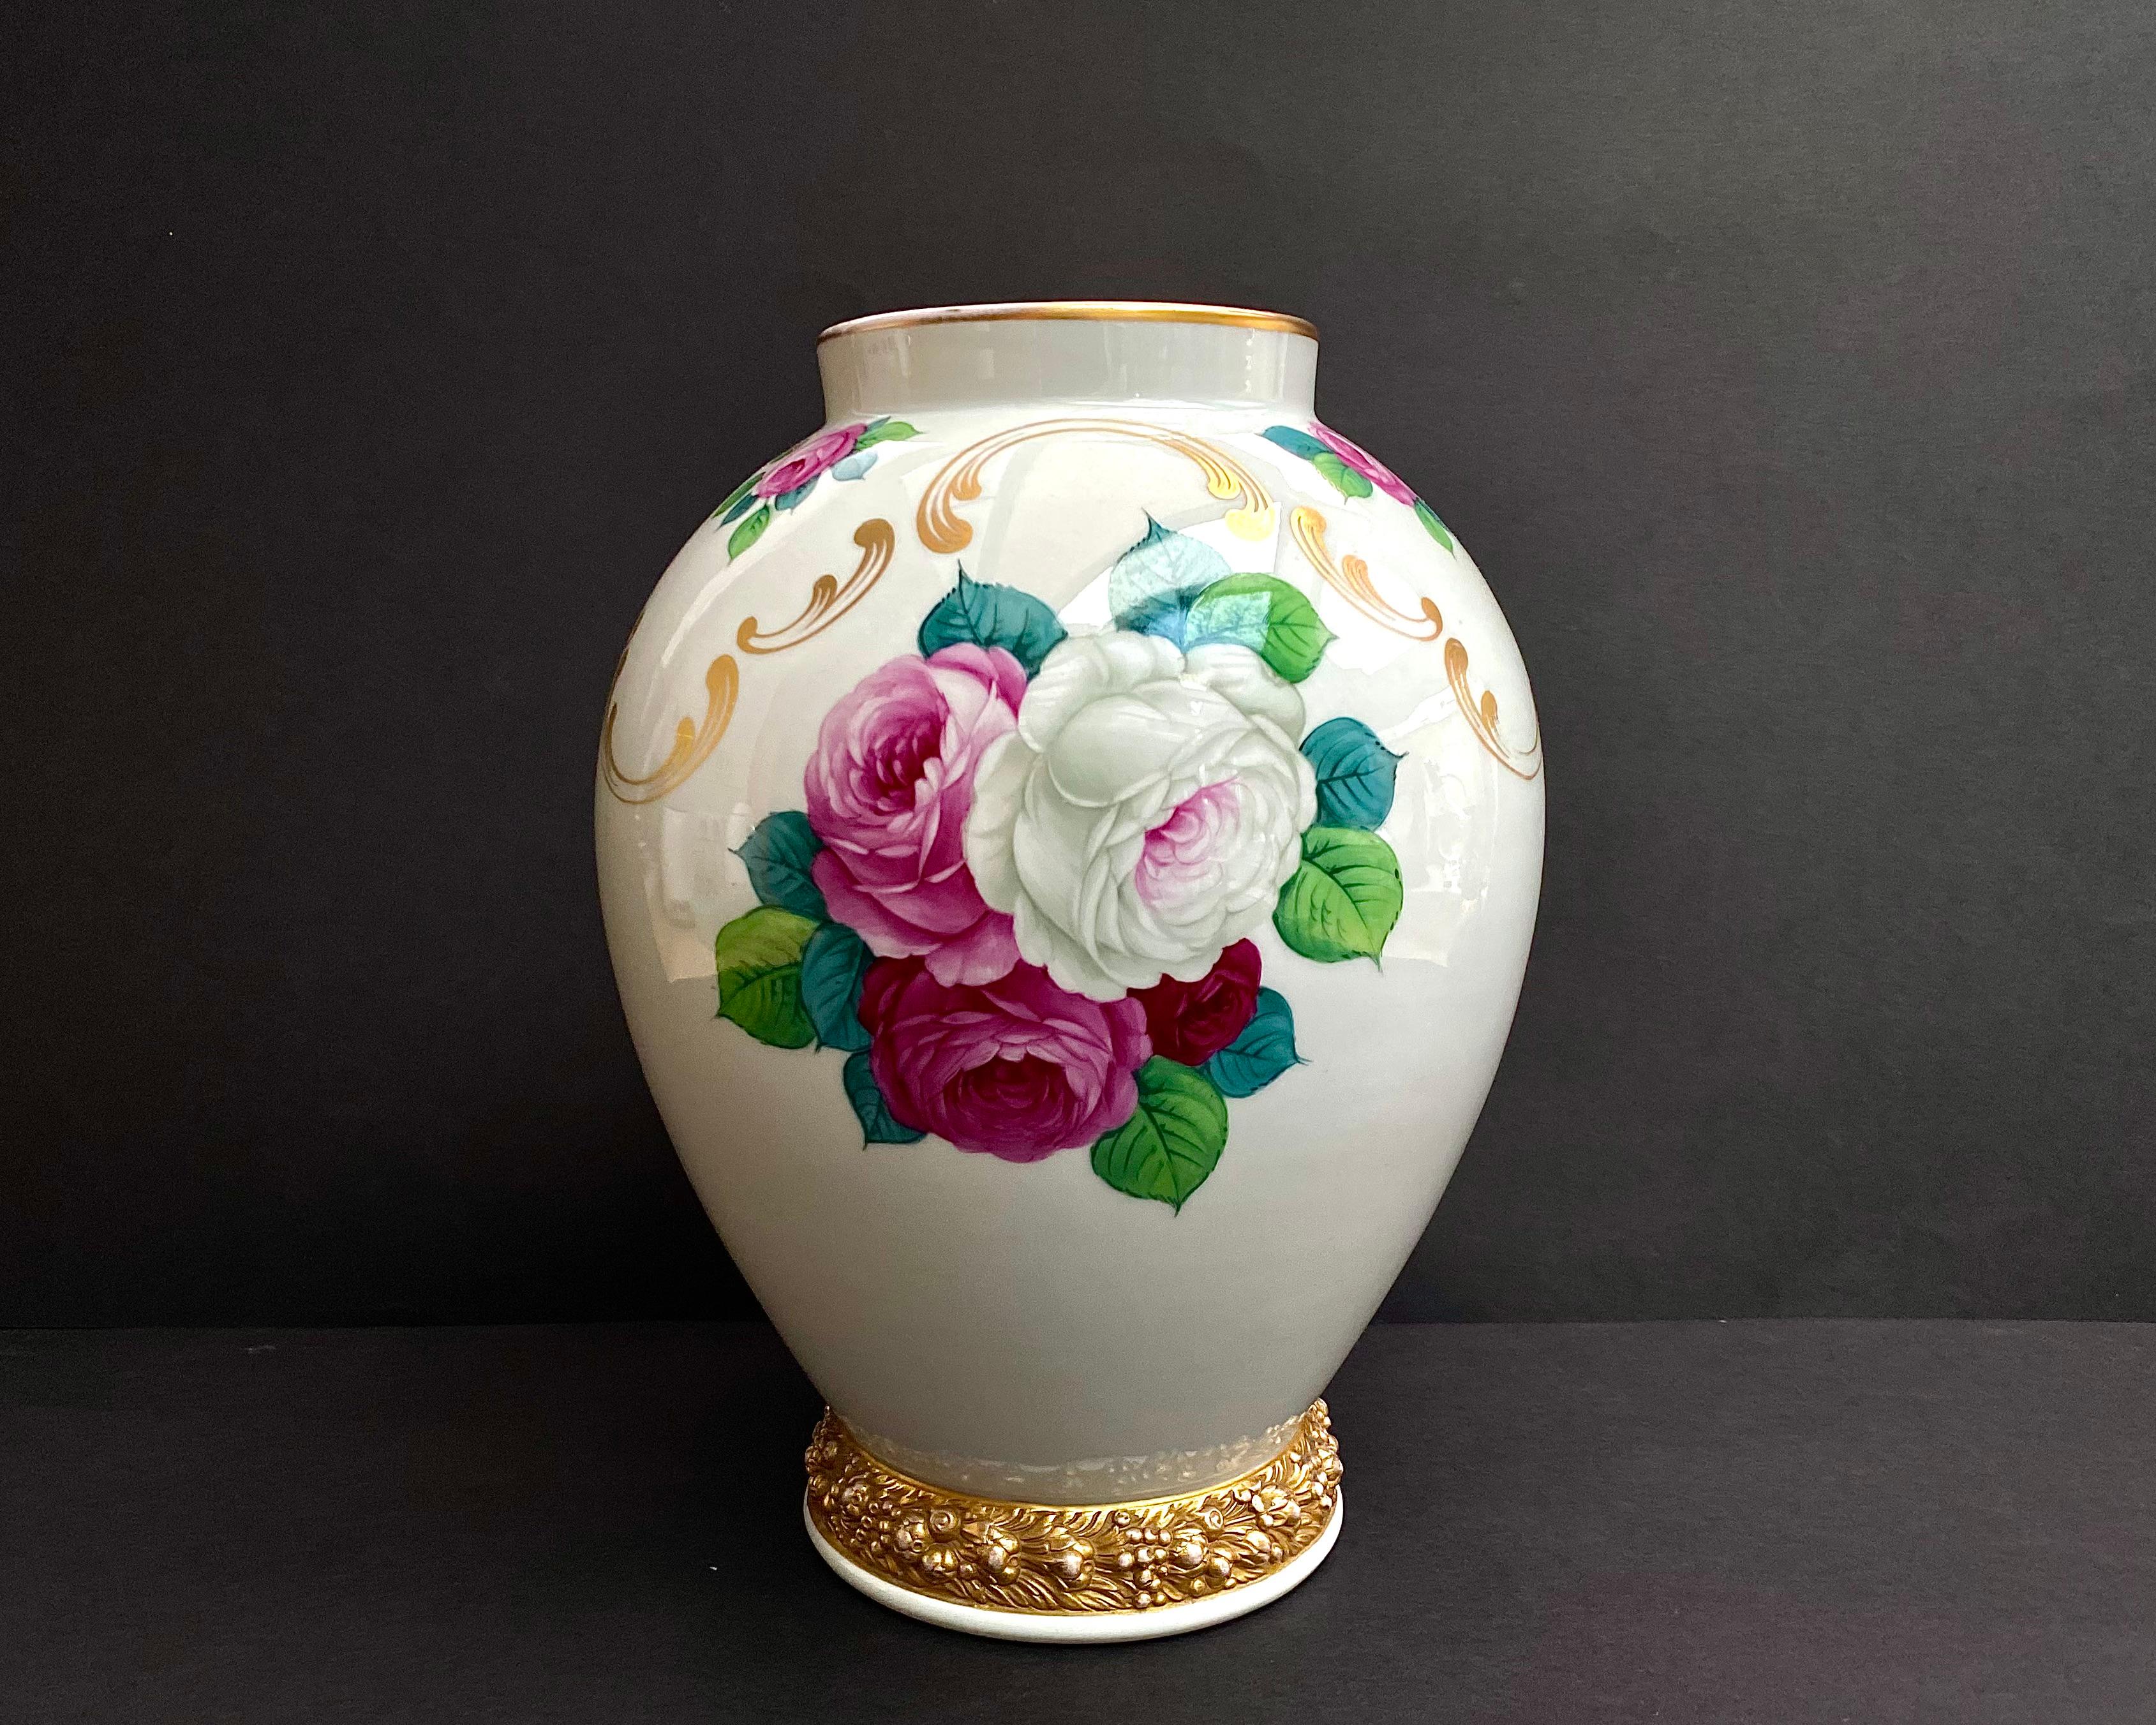 Rosenthal hand painted red roses antique vase. Outstanding artwork on the roses on this large Rosenthal antique vase.

Floral Vase hand-painted, numbered & signed.

With this vase you can create comfort and harmony in any room.

This exclusive vase